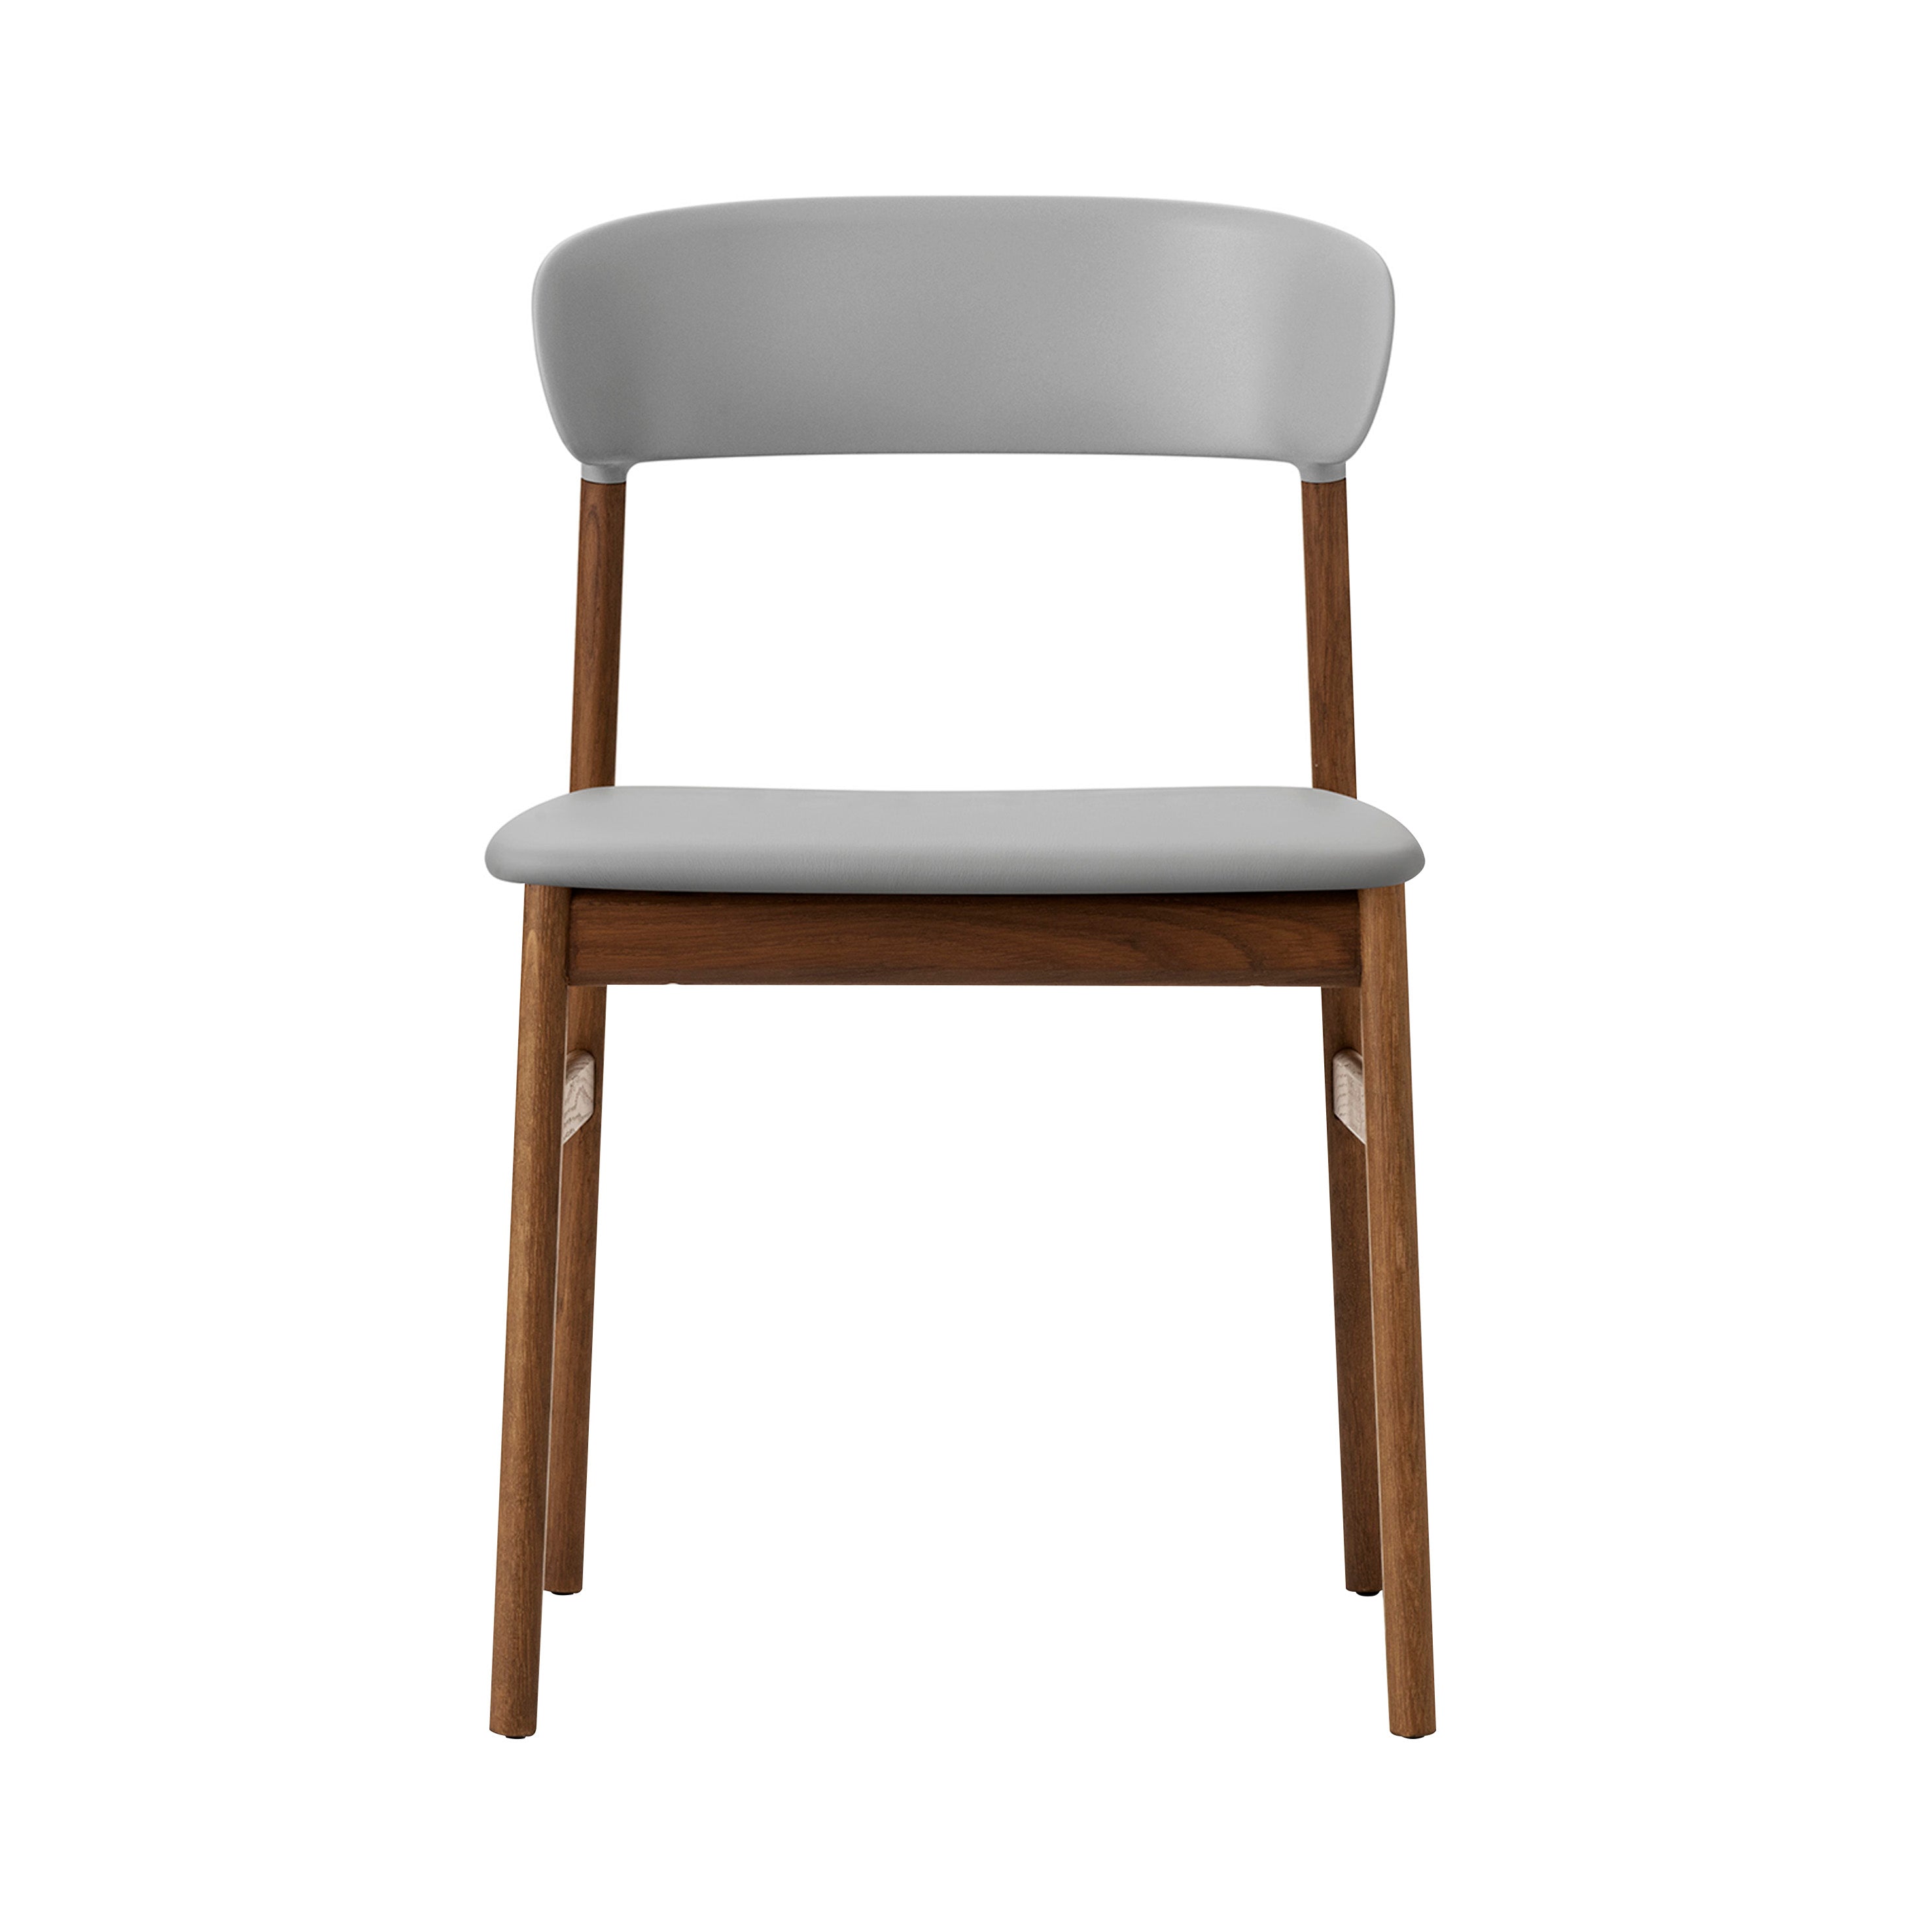 Herit Chair: Upholstered + Smoked Oak + Grey + Spectrum Leather Grey